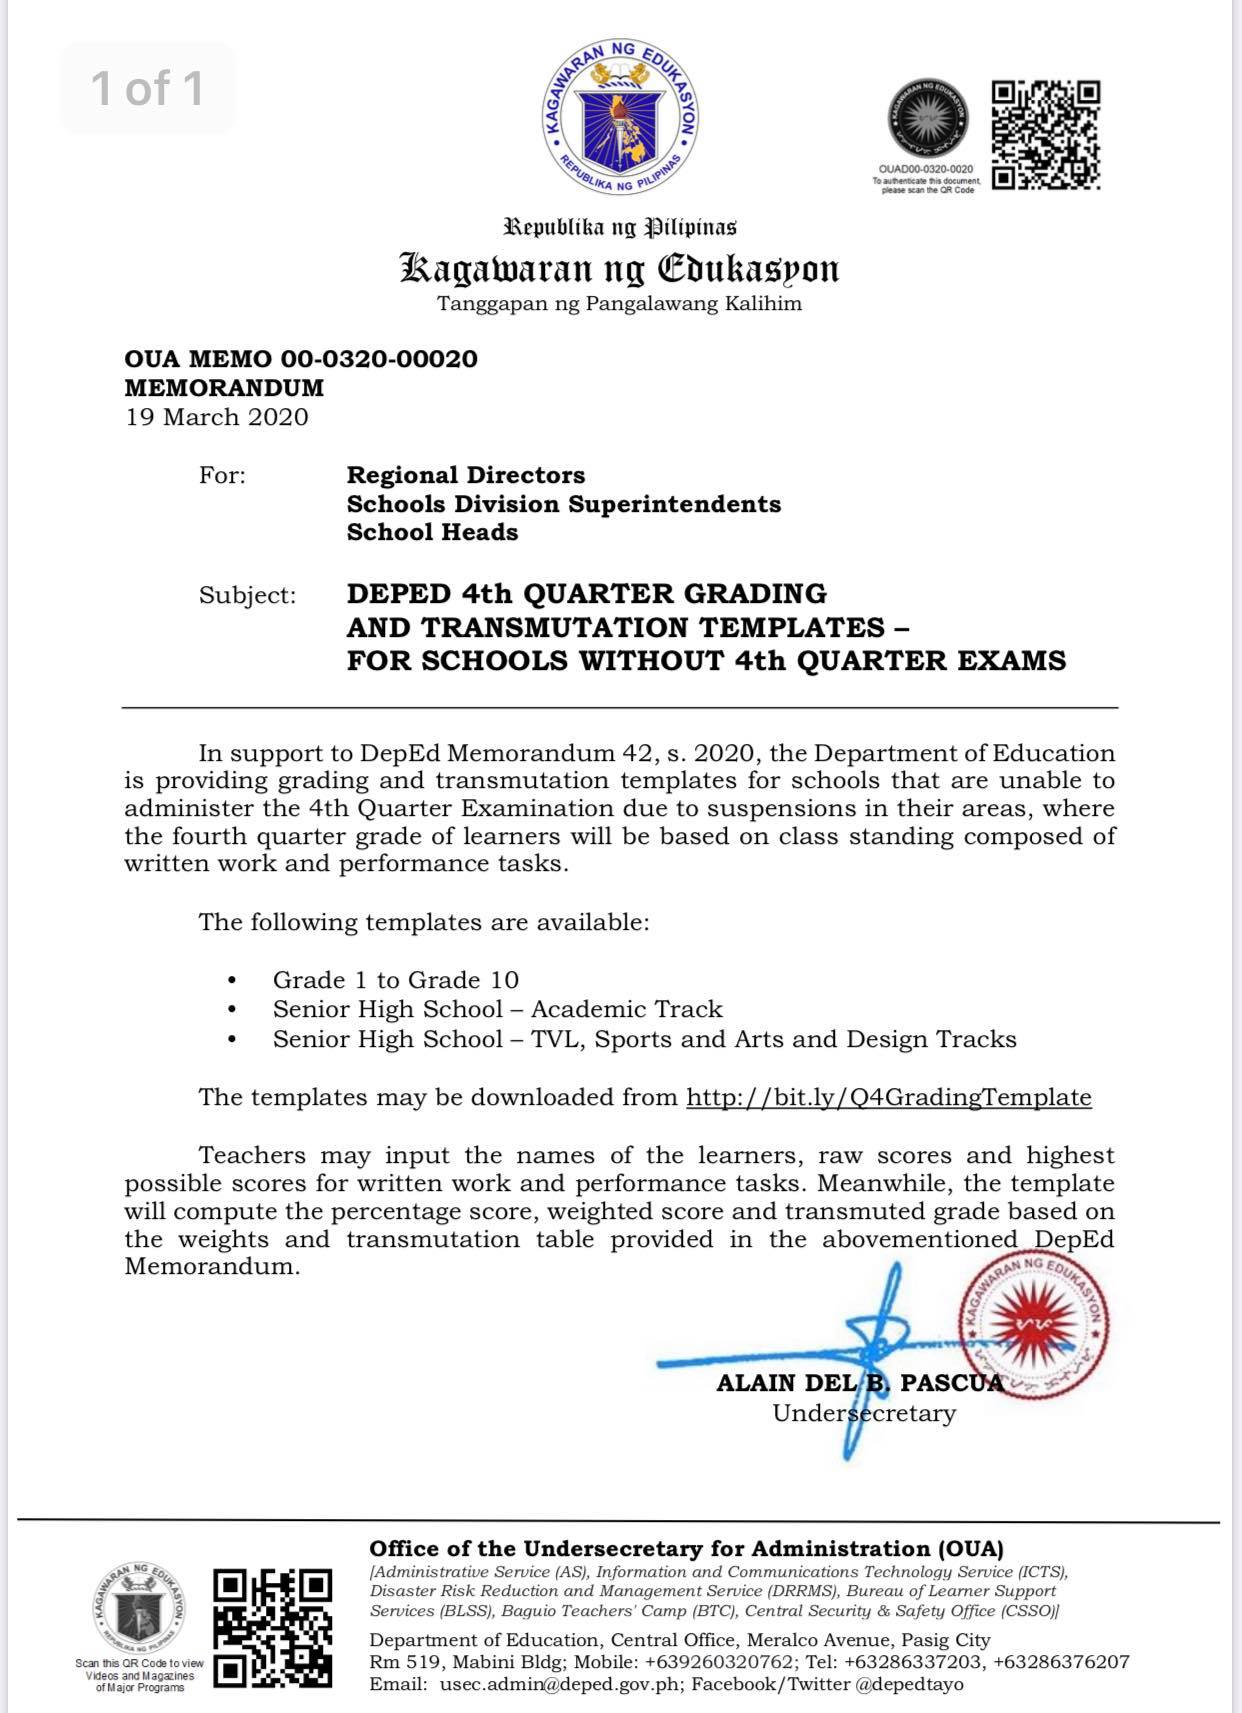 DepEd Official Transmutation Templates for Schools Without 4th Quarter Exams